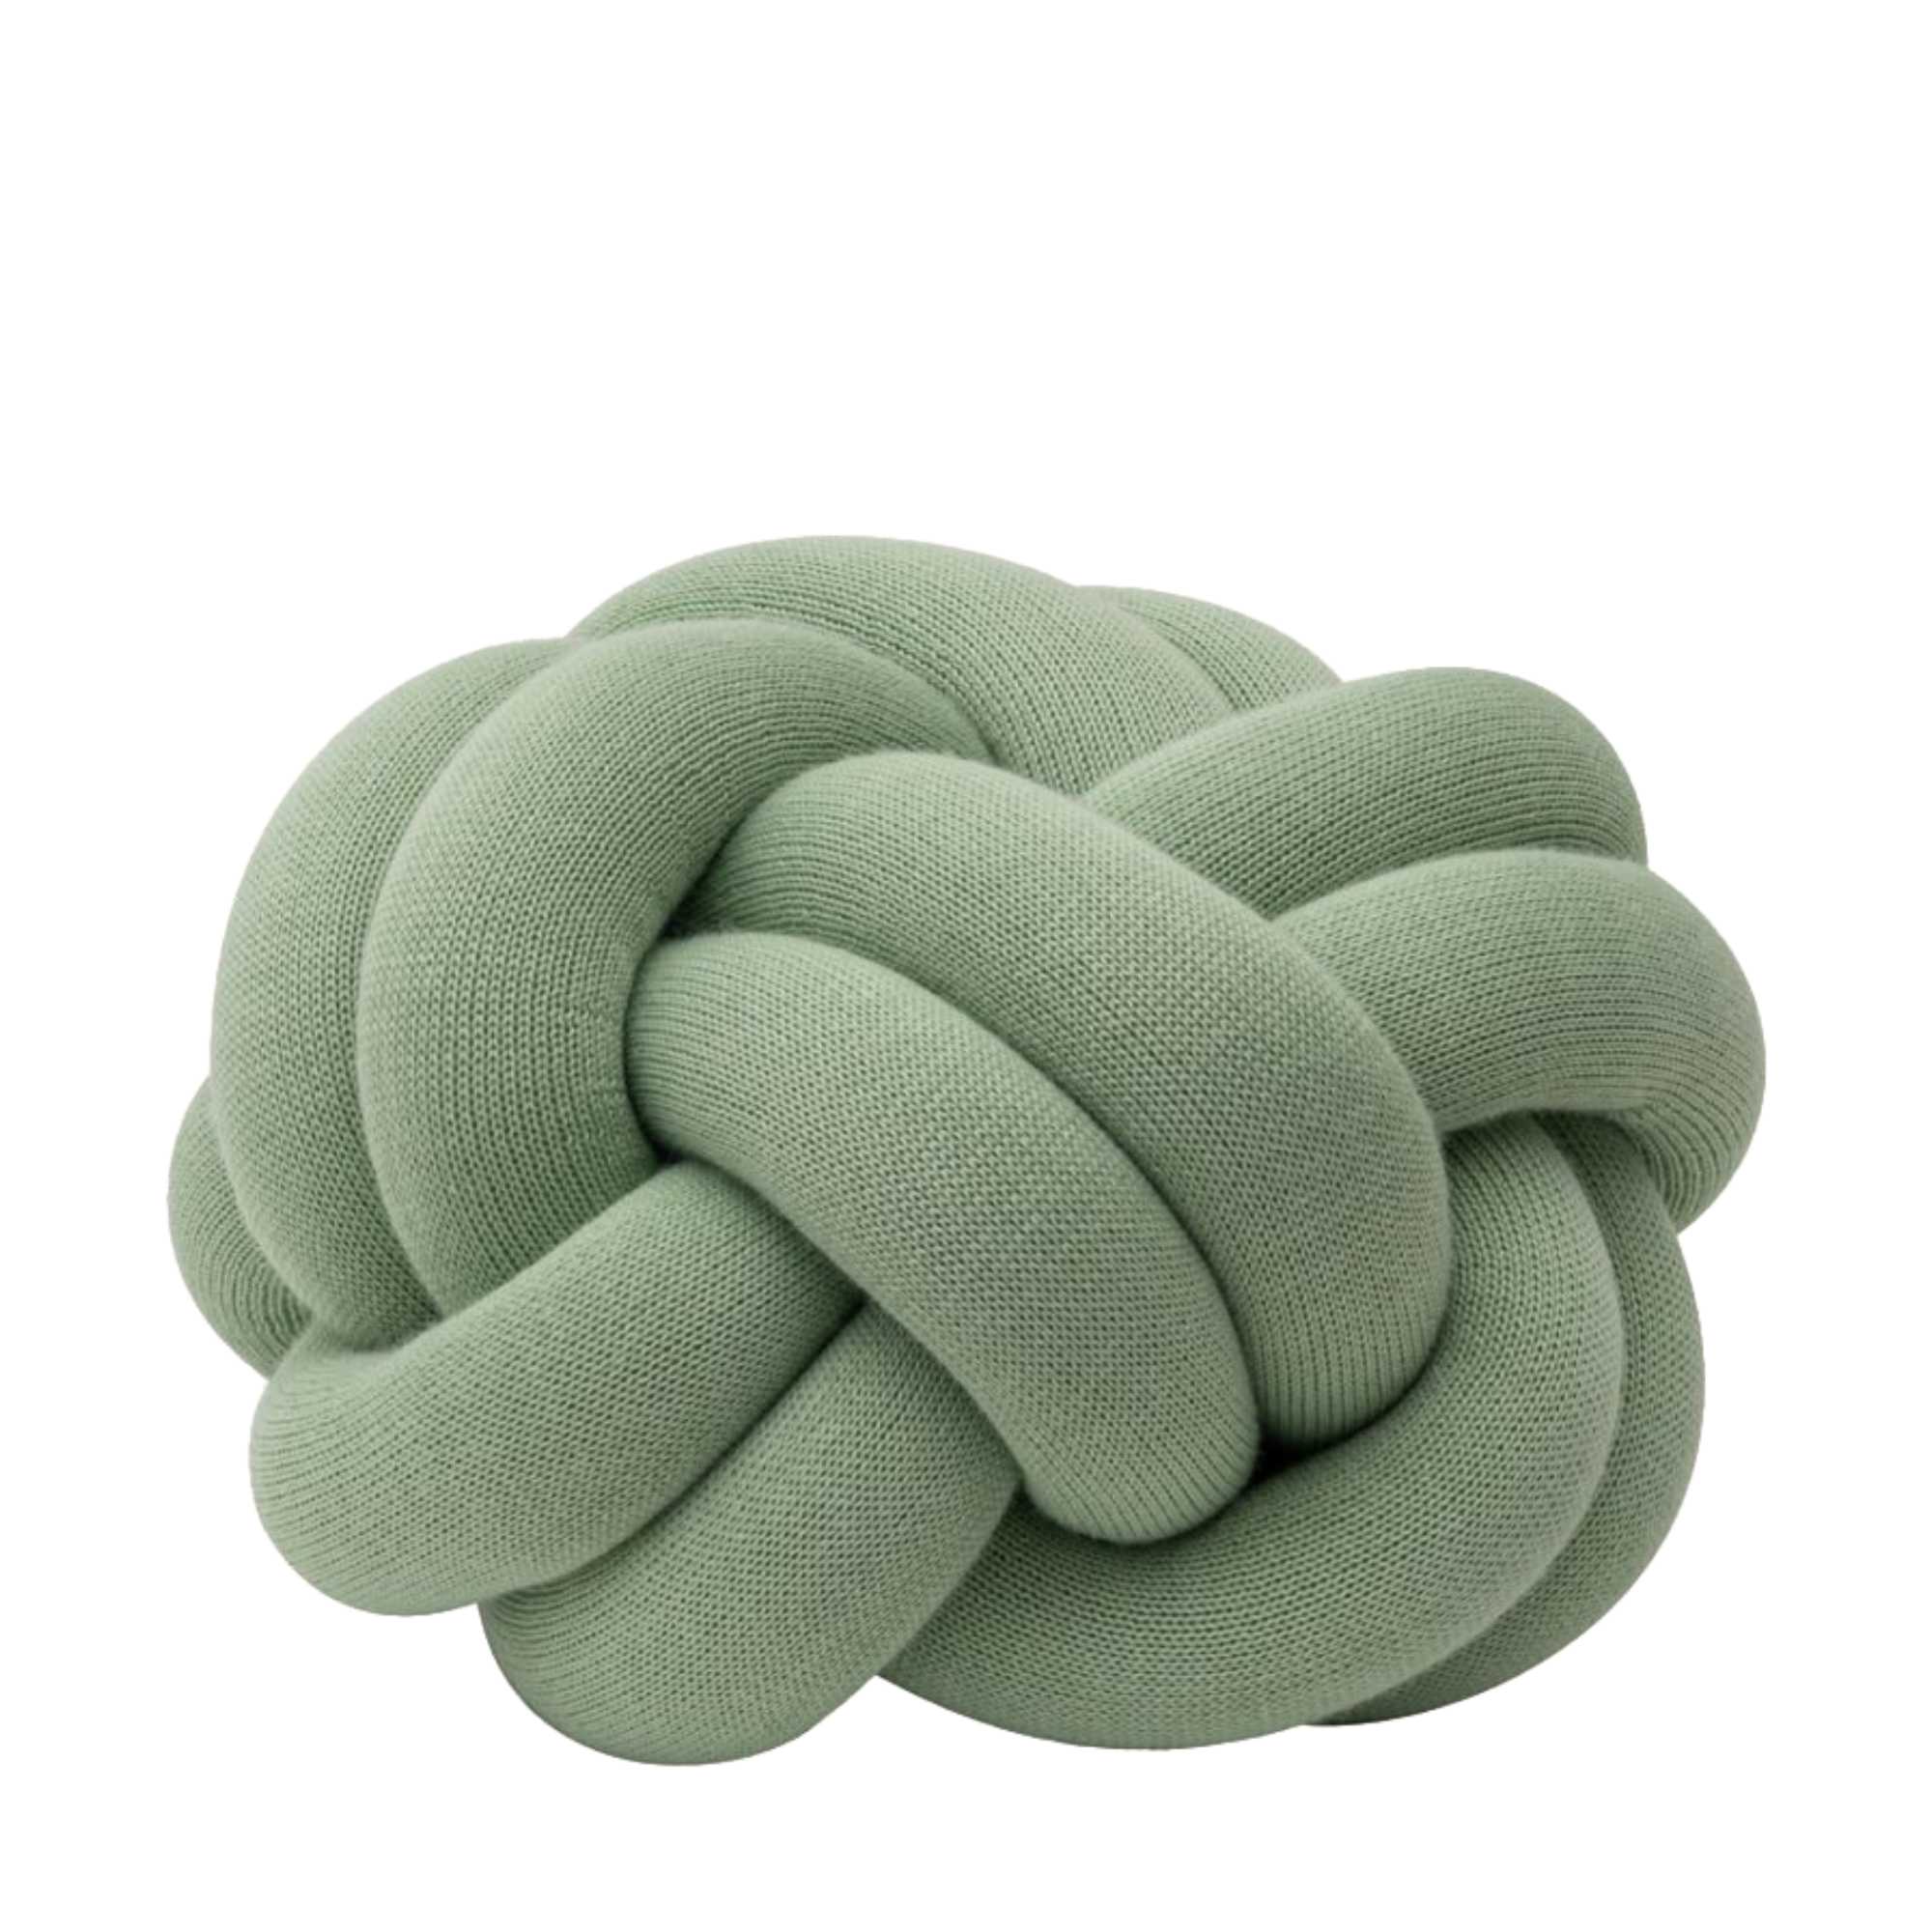 Design House Stockholm Knot cushion, mint green